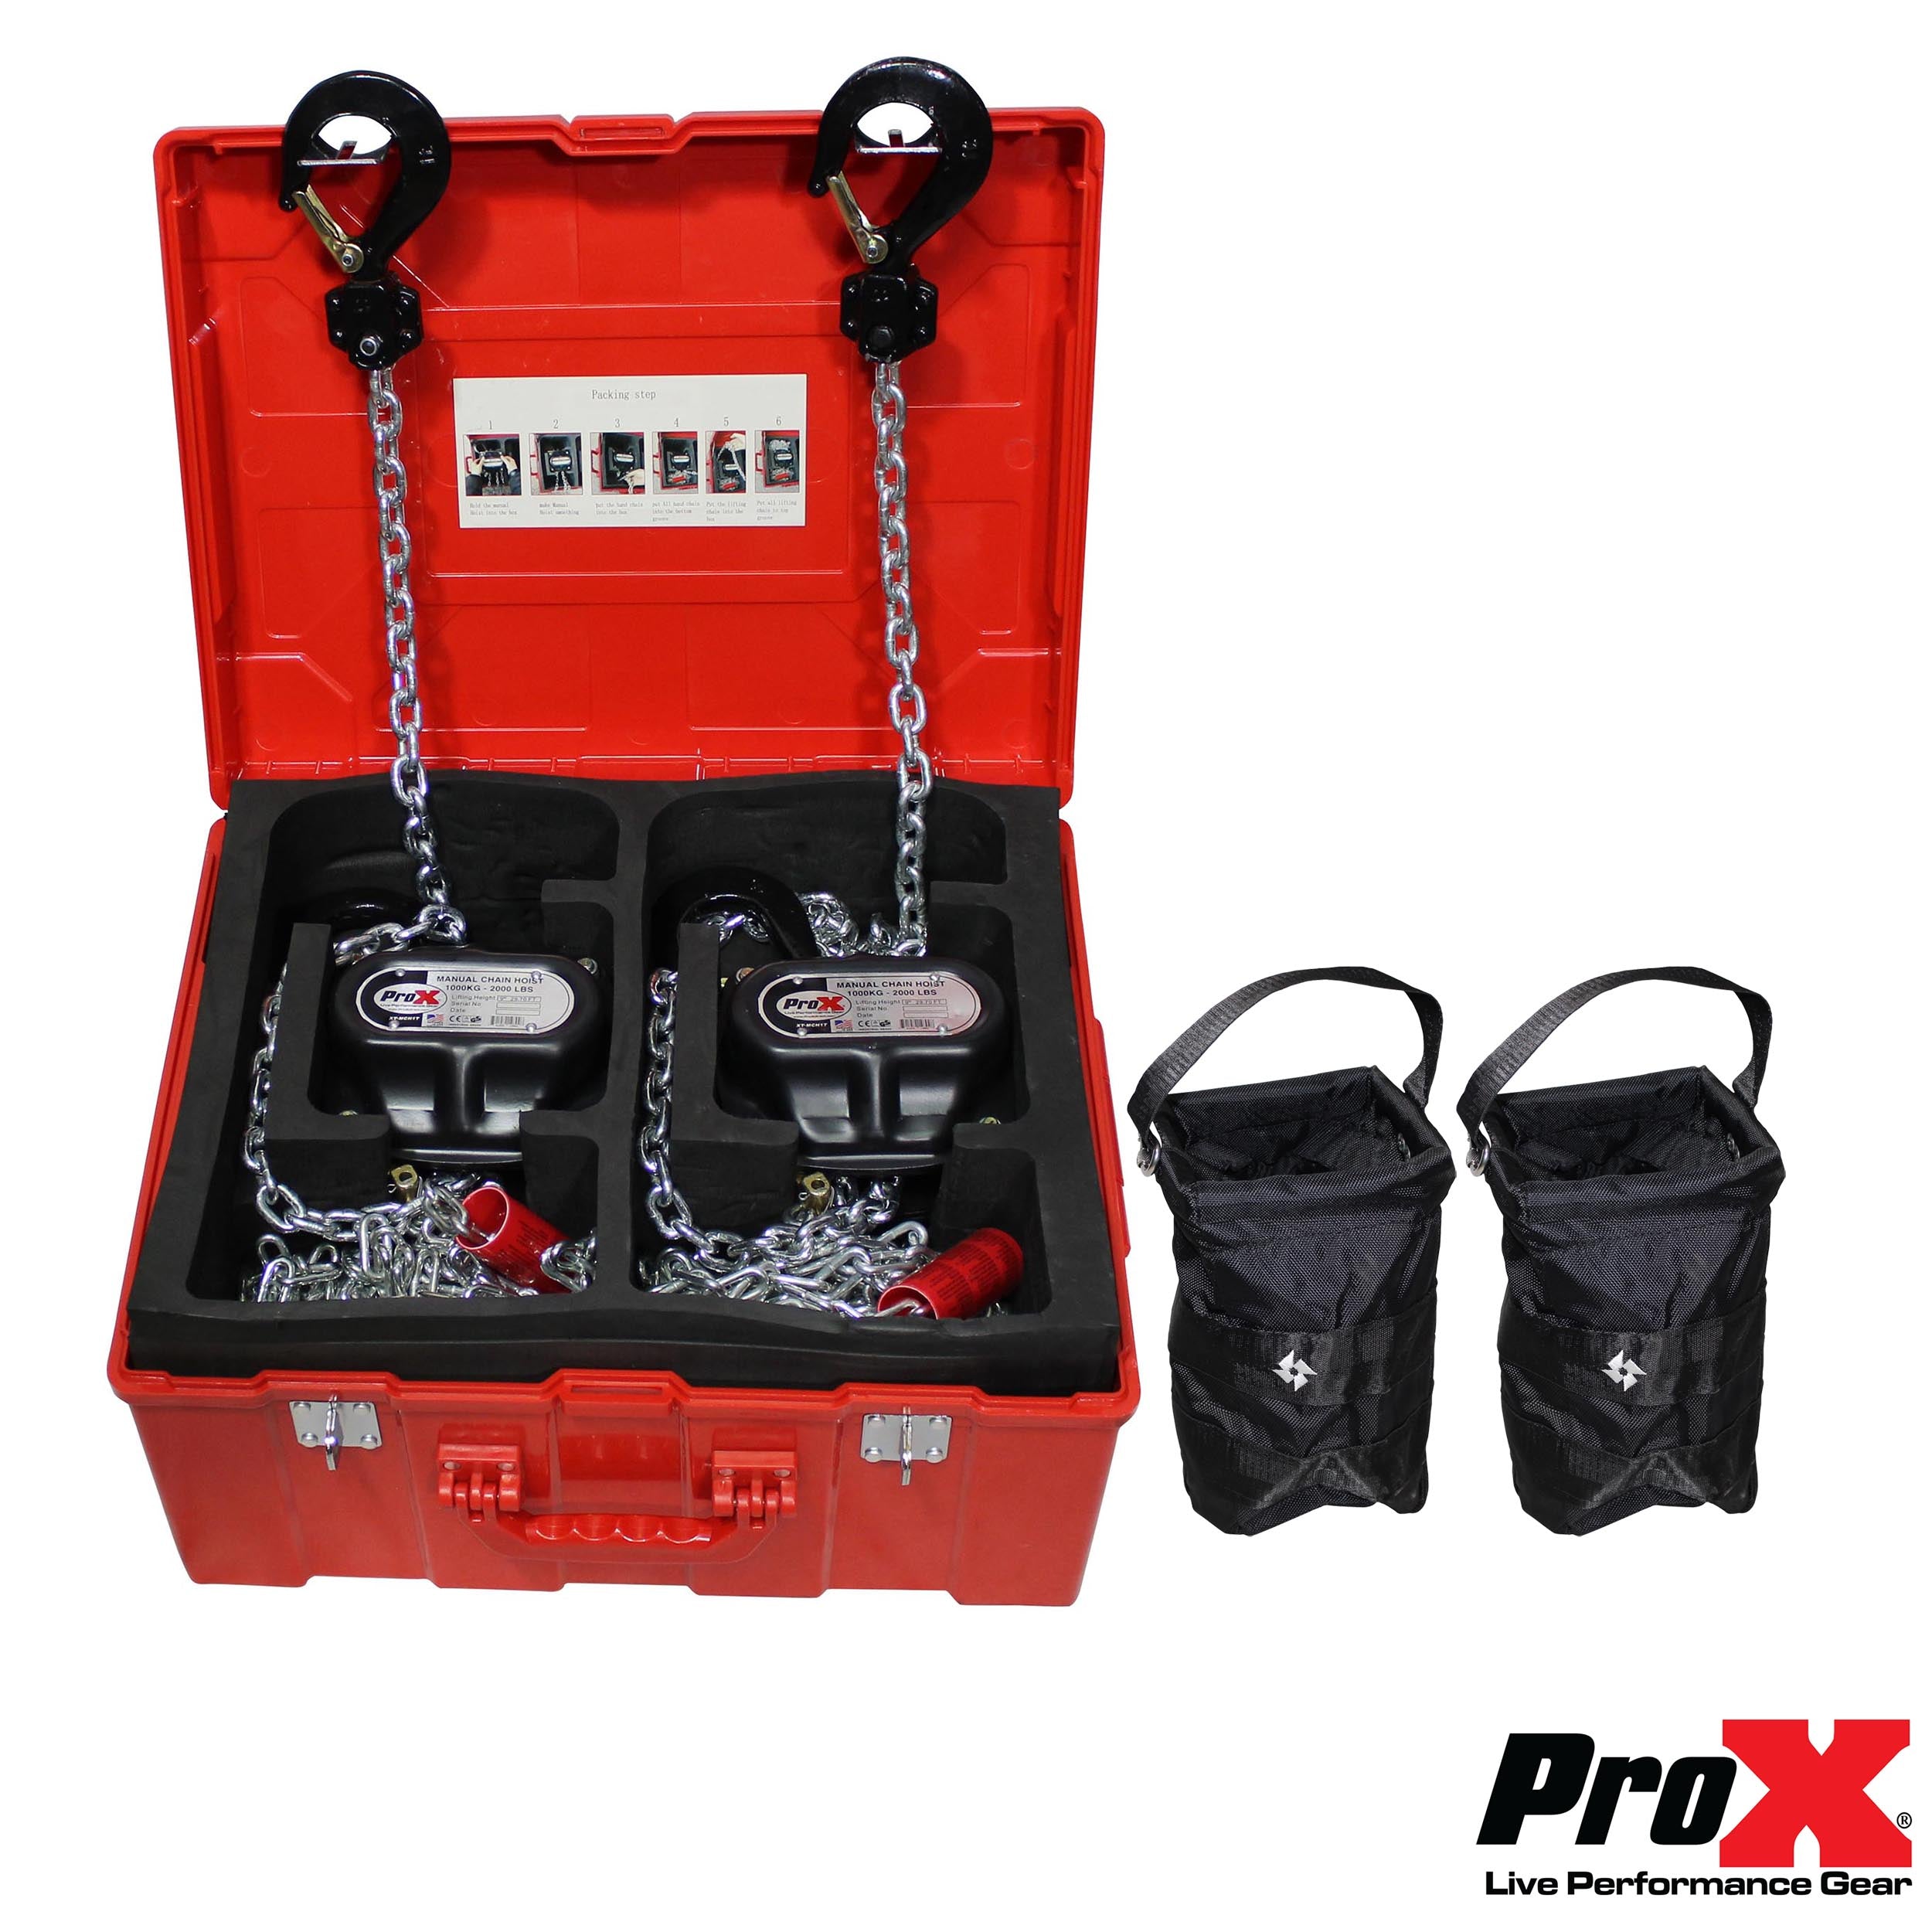 Pro X air 1 Ton Manual Chain Hoist with 30 Ft (9 M) Chain for Stage Truss roof system and line array speakers XT-MCH1TX2-30FT